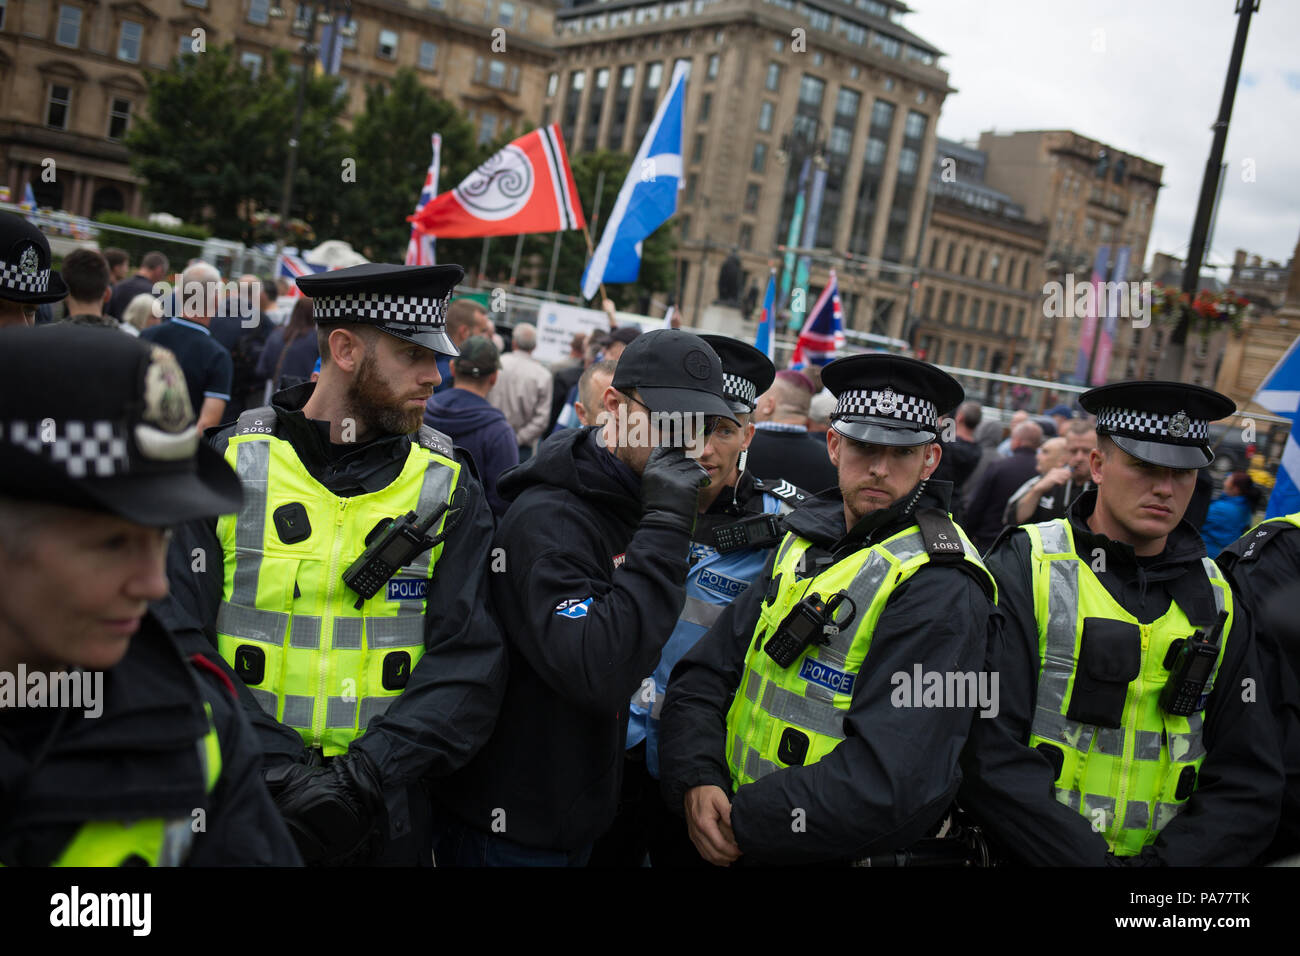 Glasgow, Scotland, on 21 July 2018. A protest by the far right Scottish Defence League, and counter demonstration by the United Against Facism groups, in George Square, Glasgow, Scotland.  Mounted police and police with dogs separated the two groups as the Scottish Defence League espoused their anti-immigrant rhetoric and accused immigrants of running grooming gangs. Image credit: Alamy News. Stock Photo